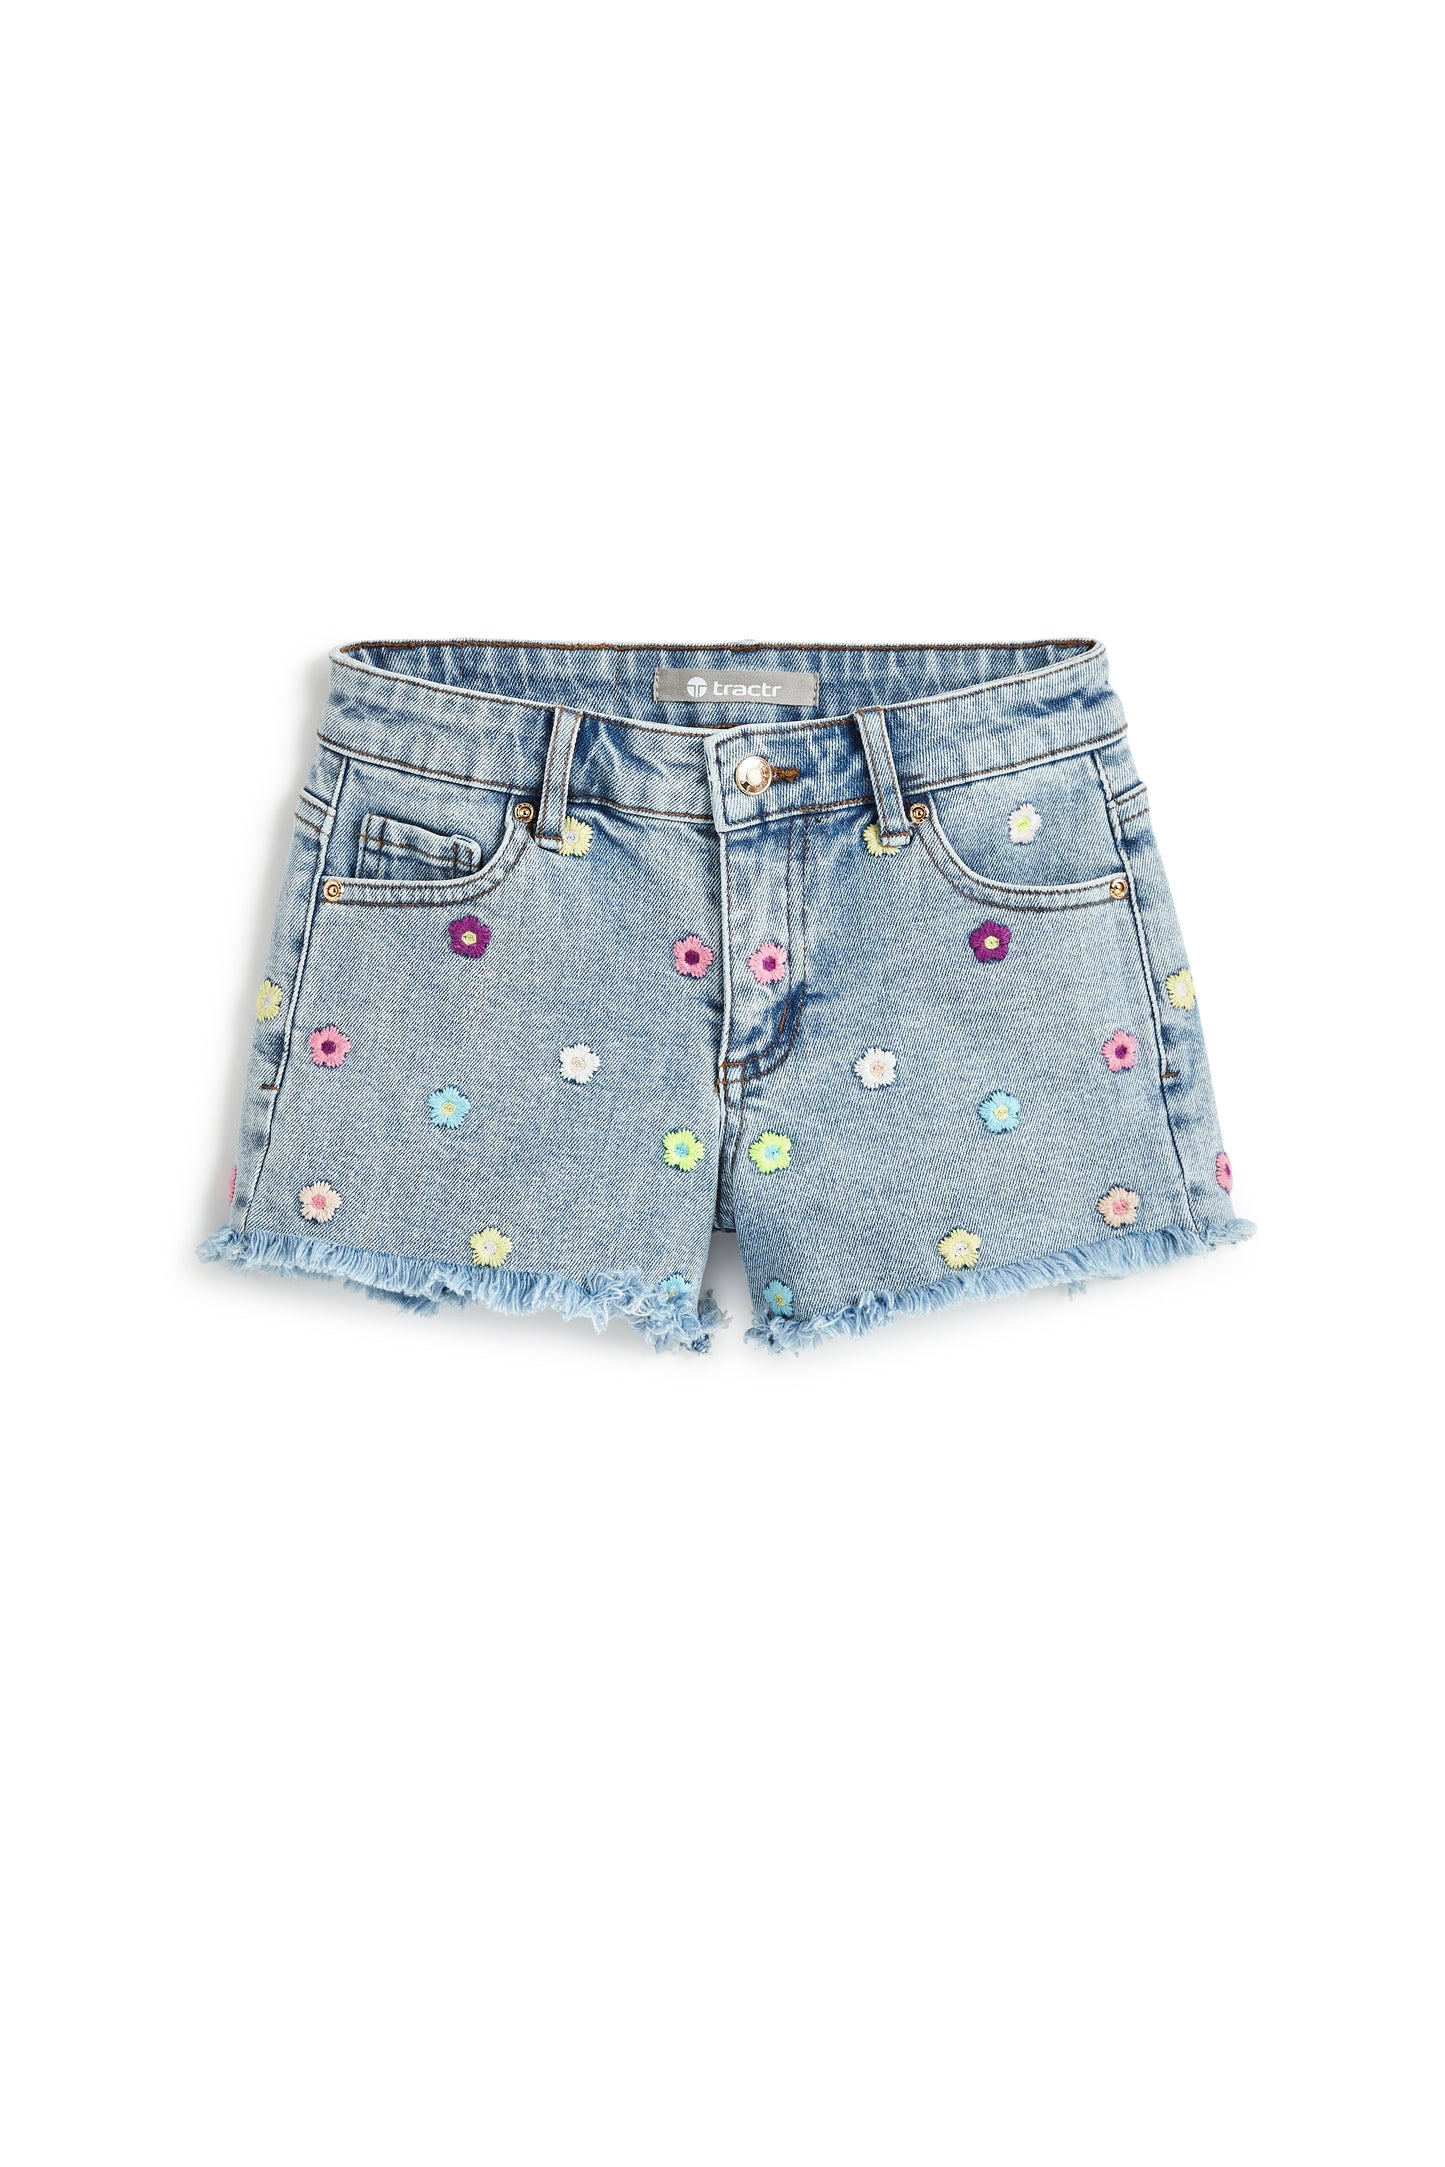 Tractr Girls 7-14 Floral Embroidered Frayed Shorts